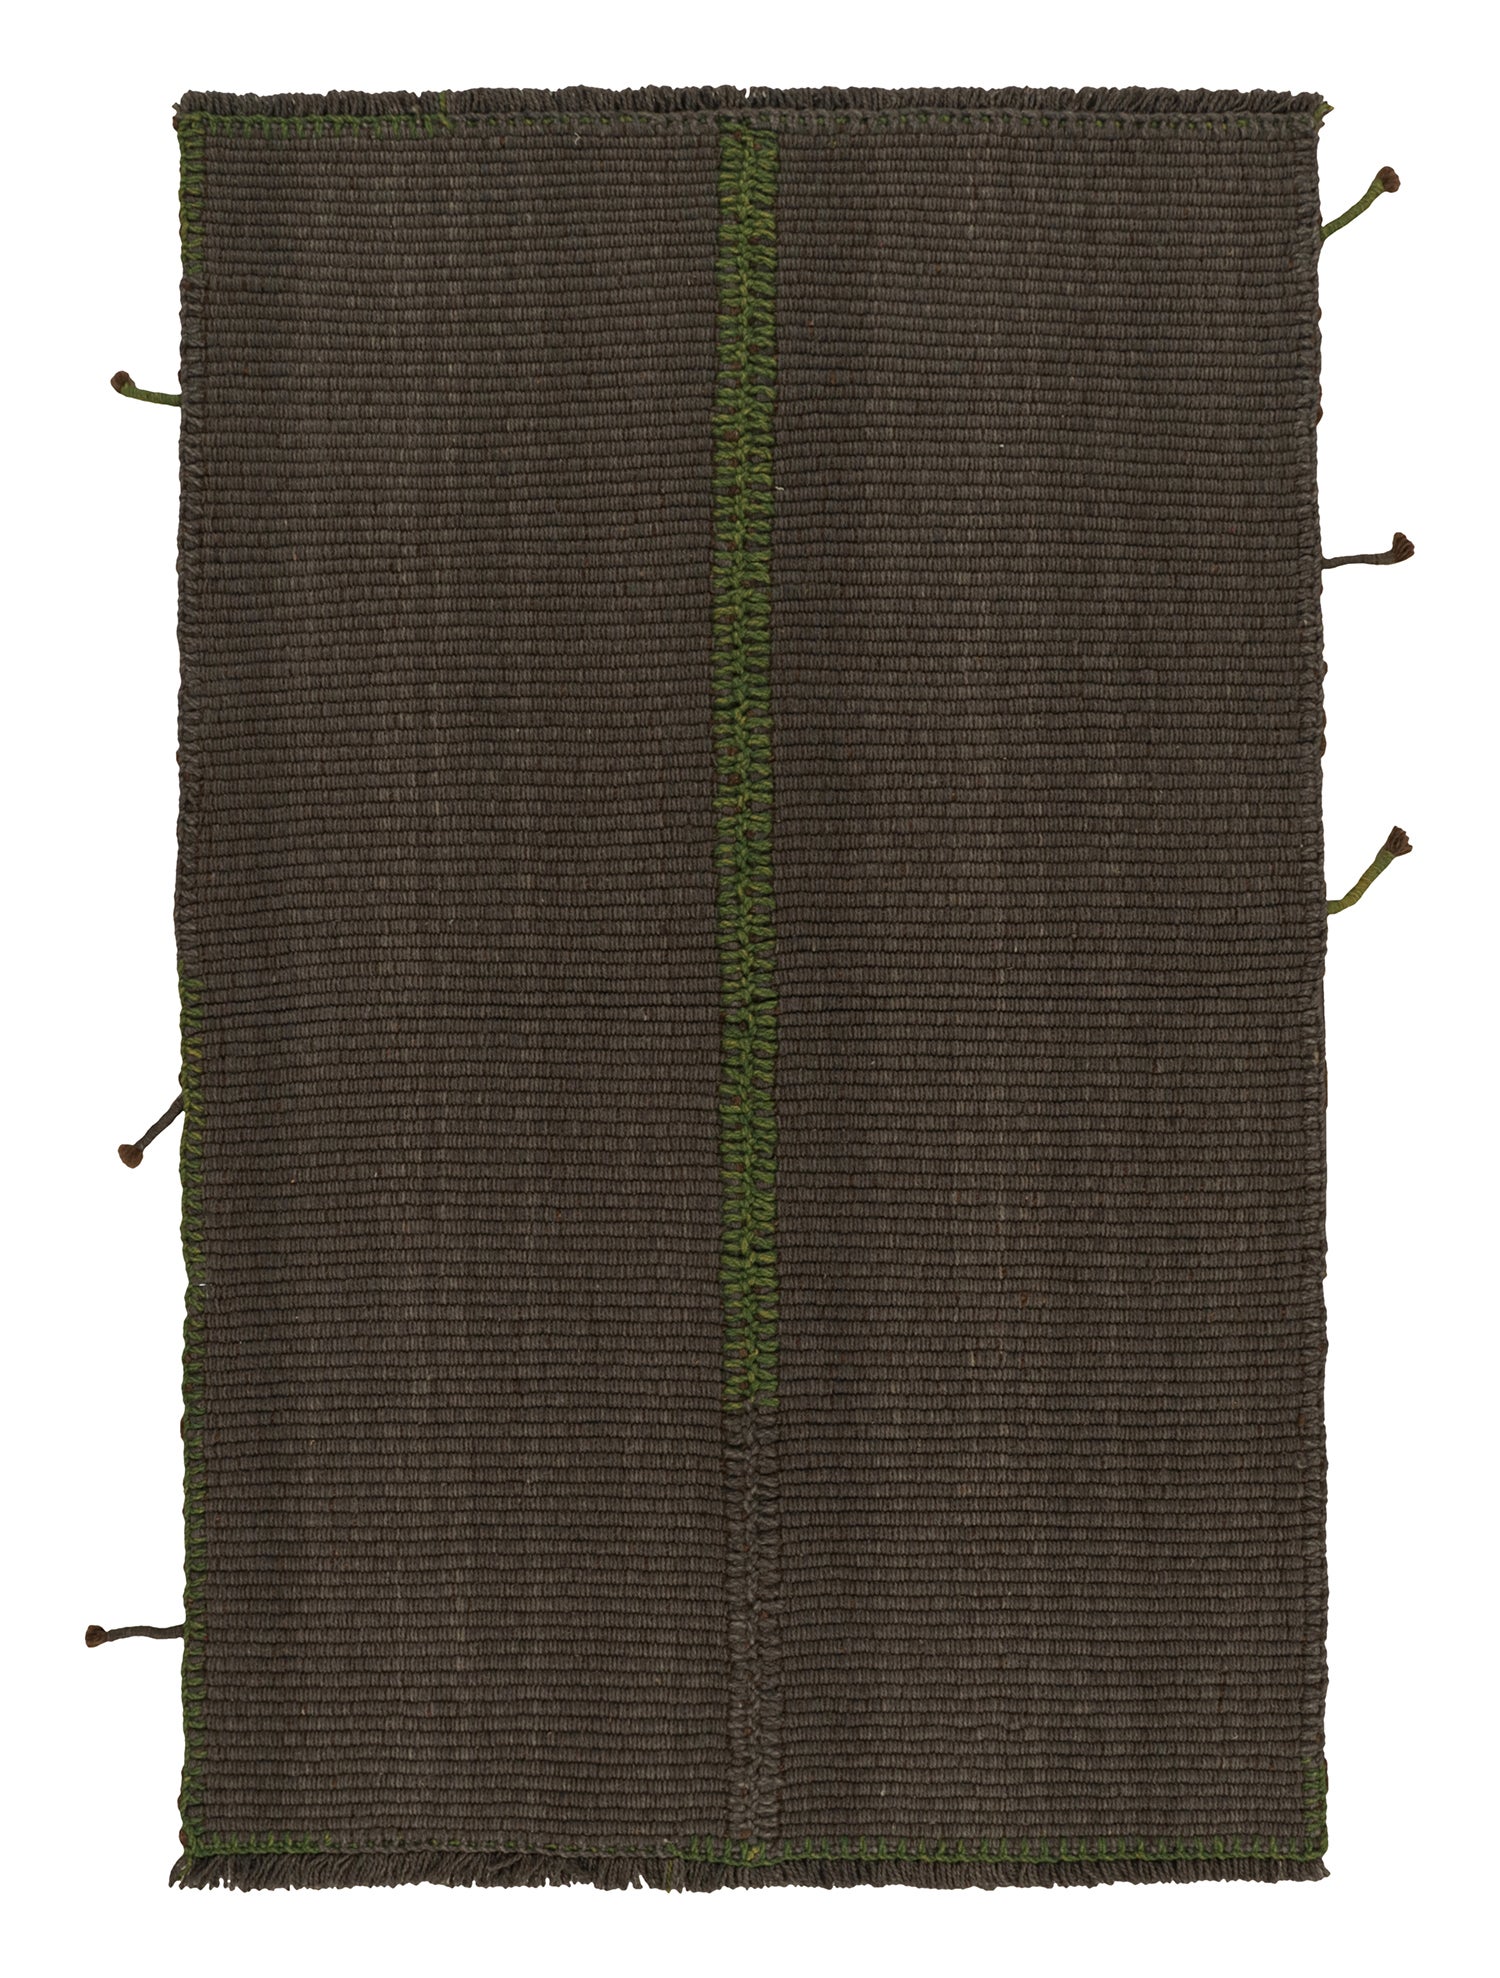 Rug & Kilim’s Contemporary Kilim in Brown with Green Accents